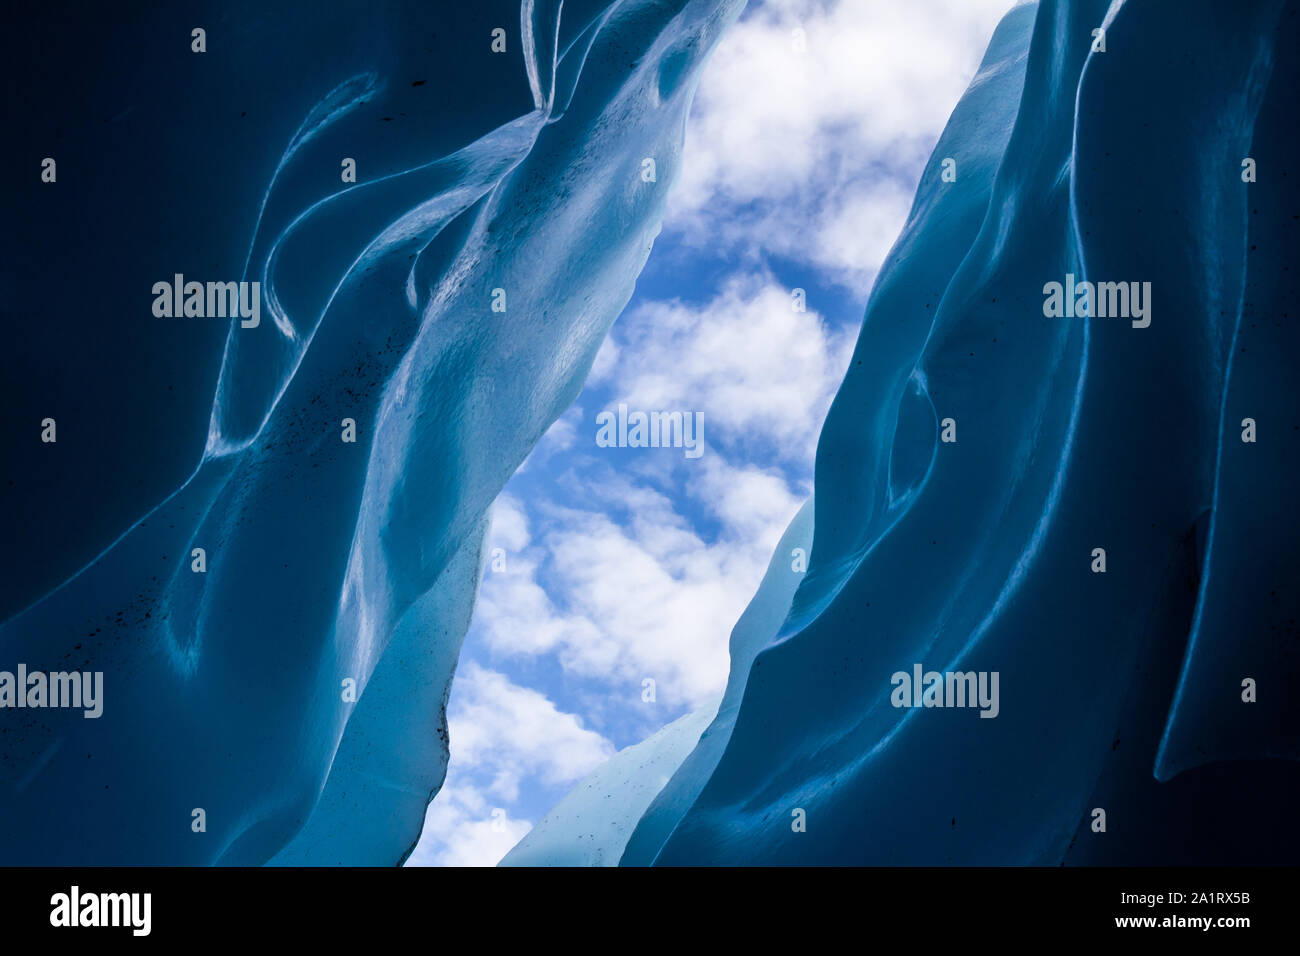 Light bounces off blue ice walls of a crevasse from deep within the Matanuska Glacier in Alaska. The sky above is filled with airy clouds. Stock Photo